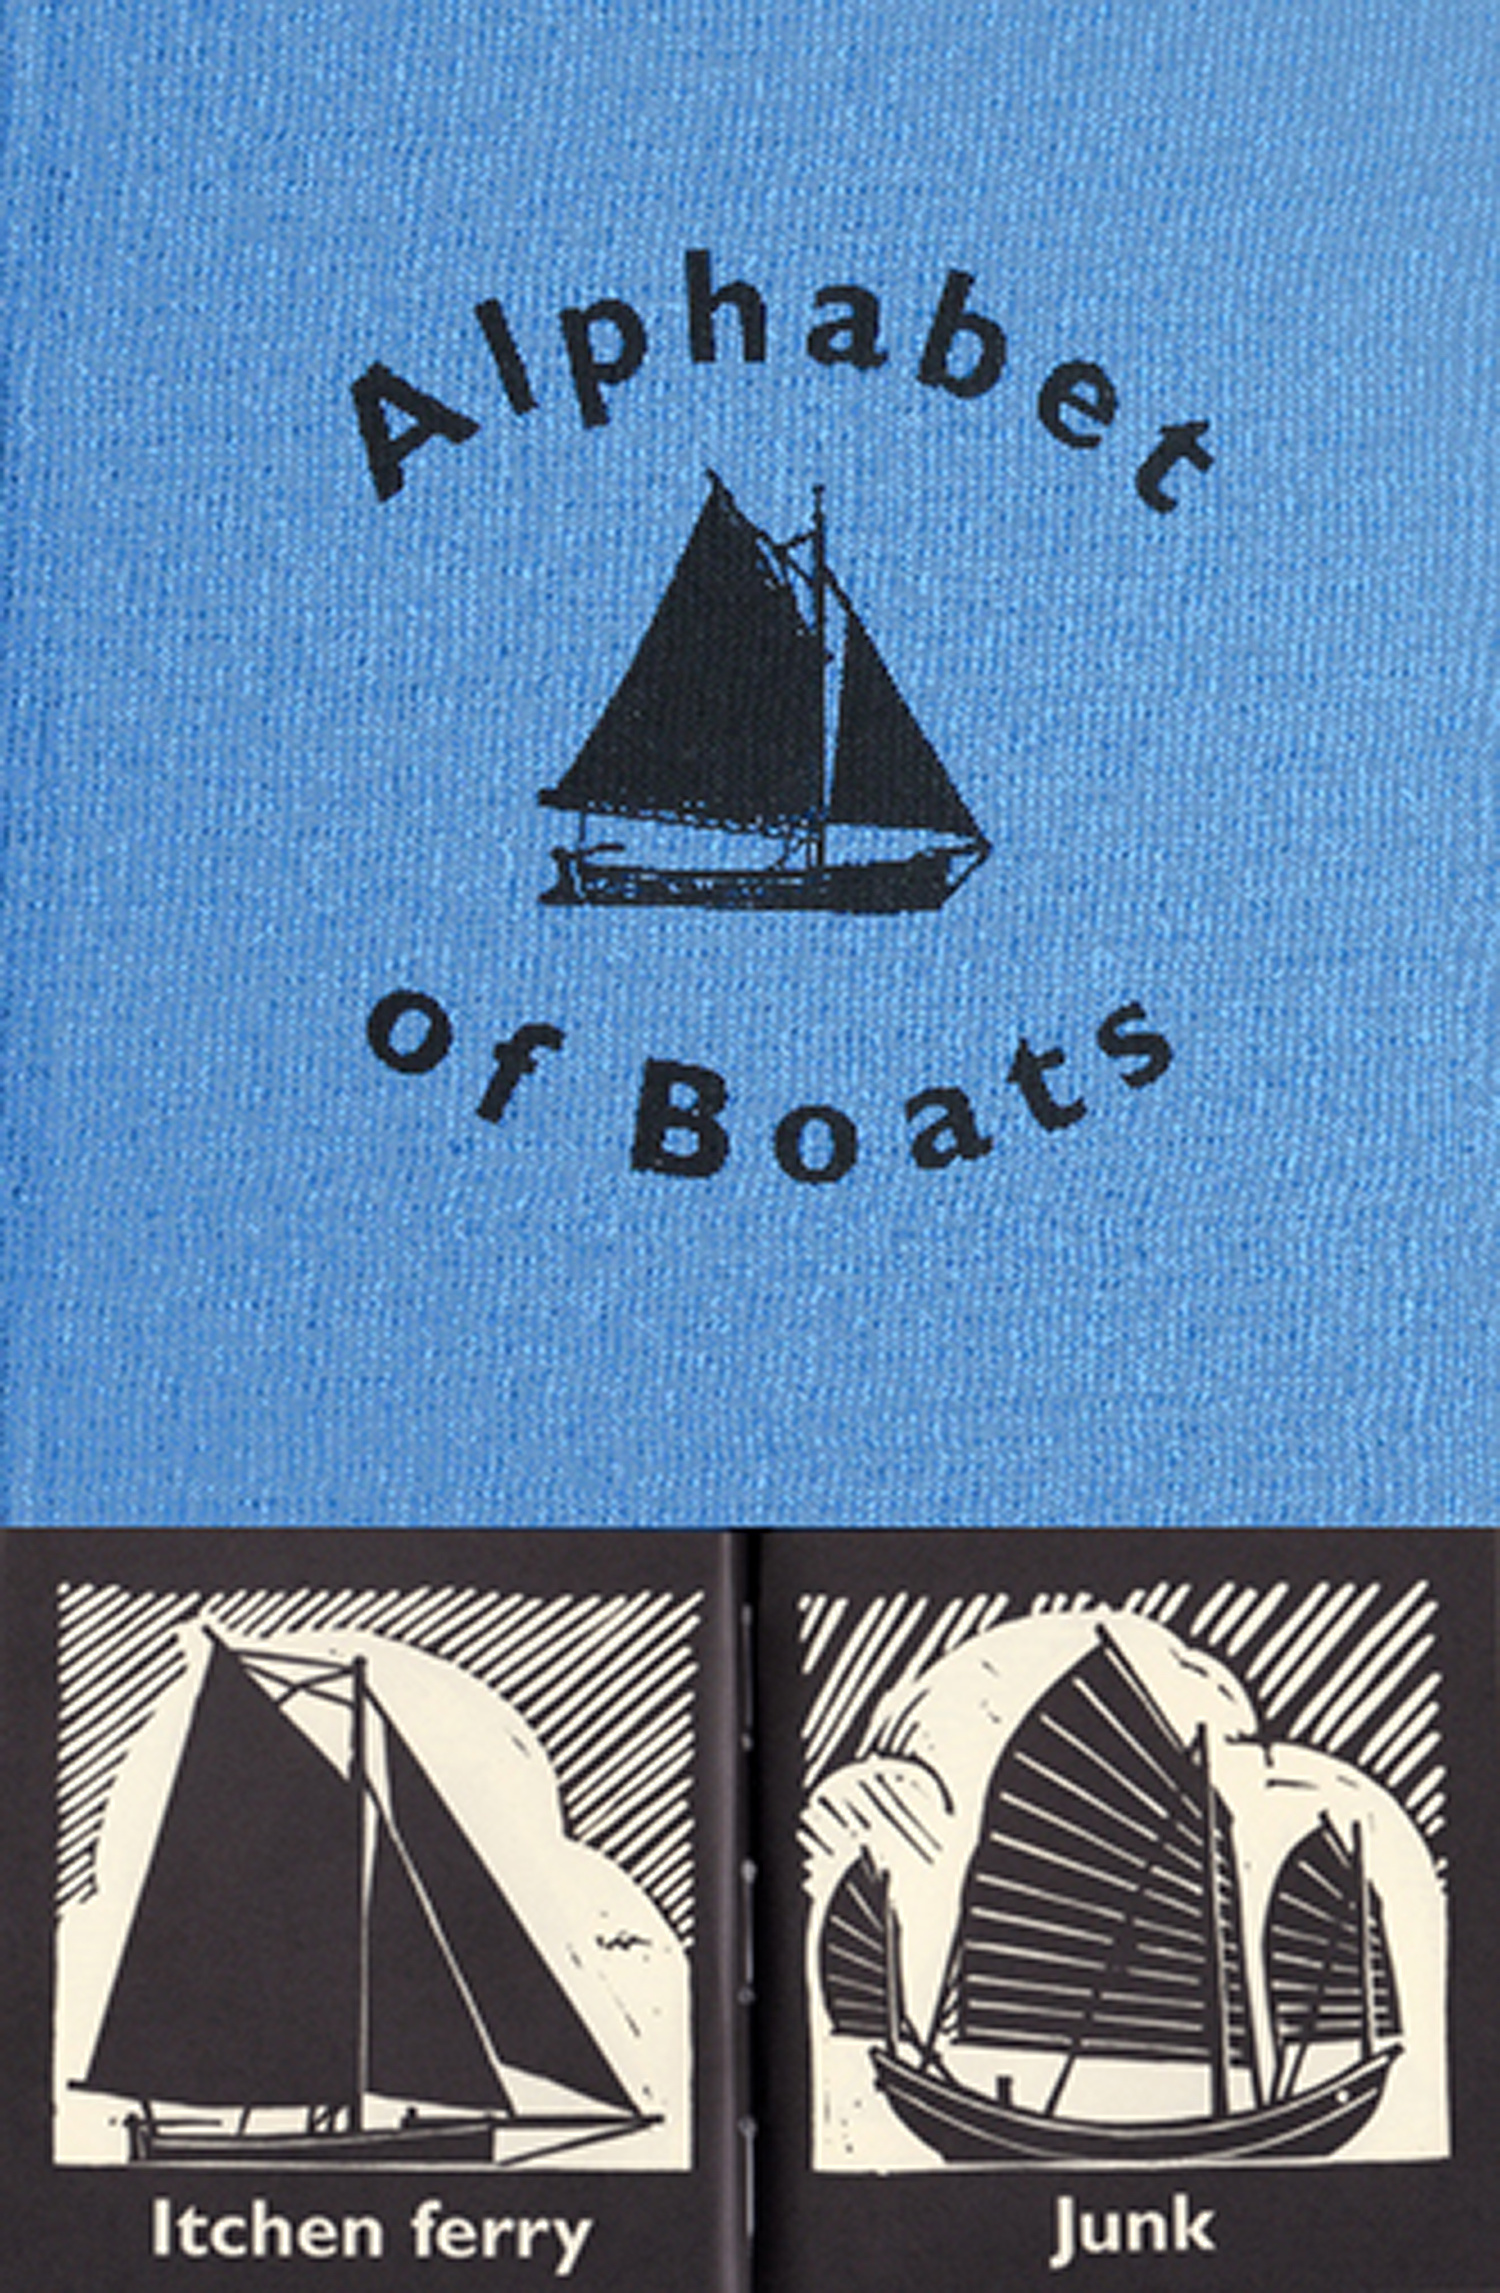 Alphabet of Boats by James Dodds